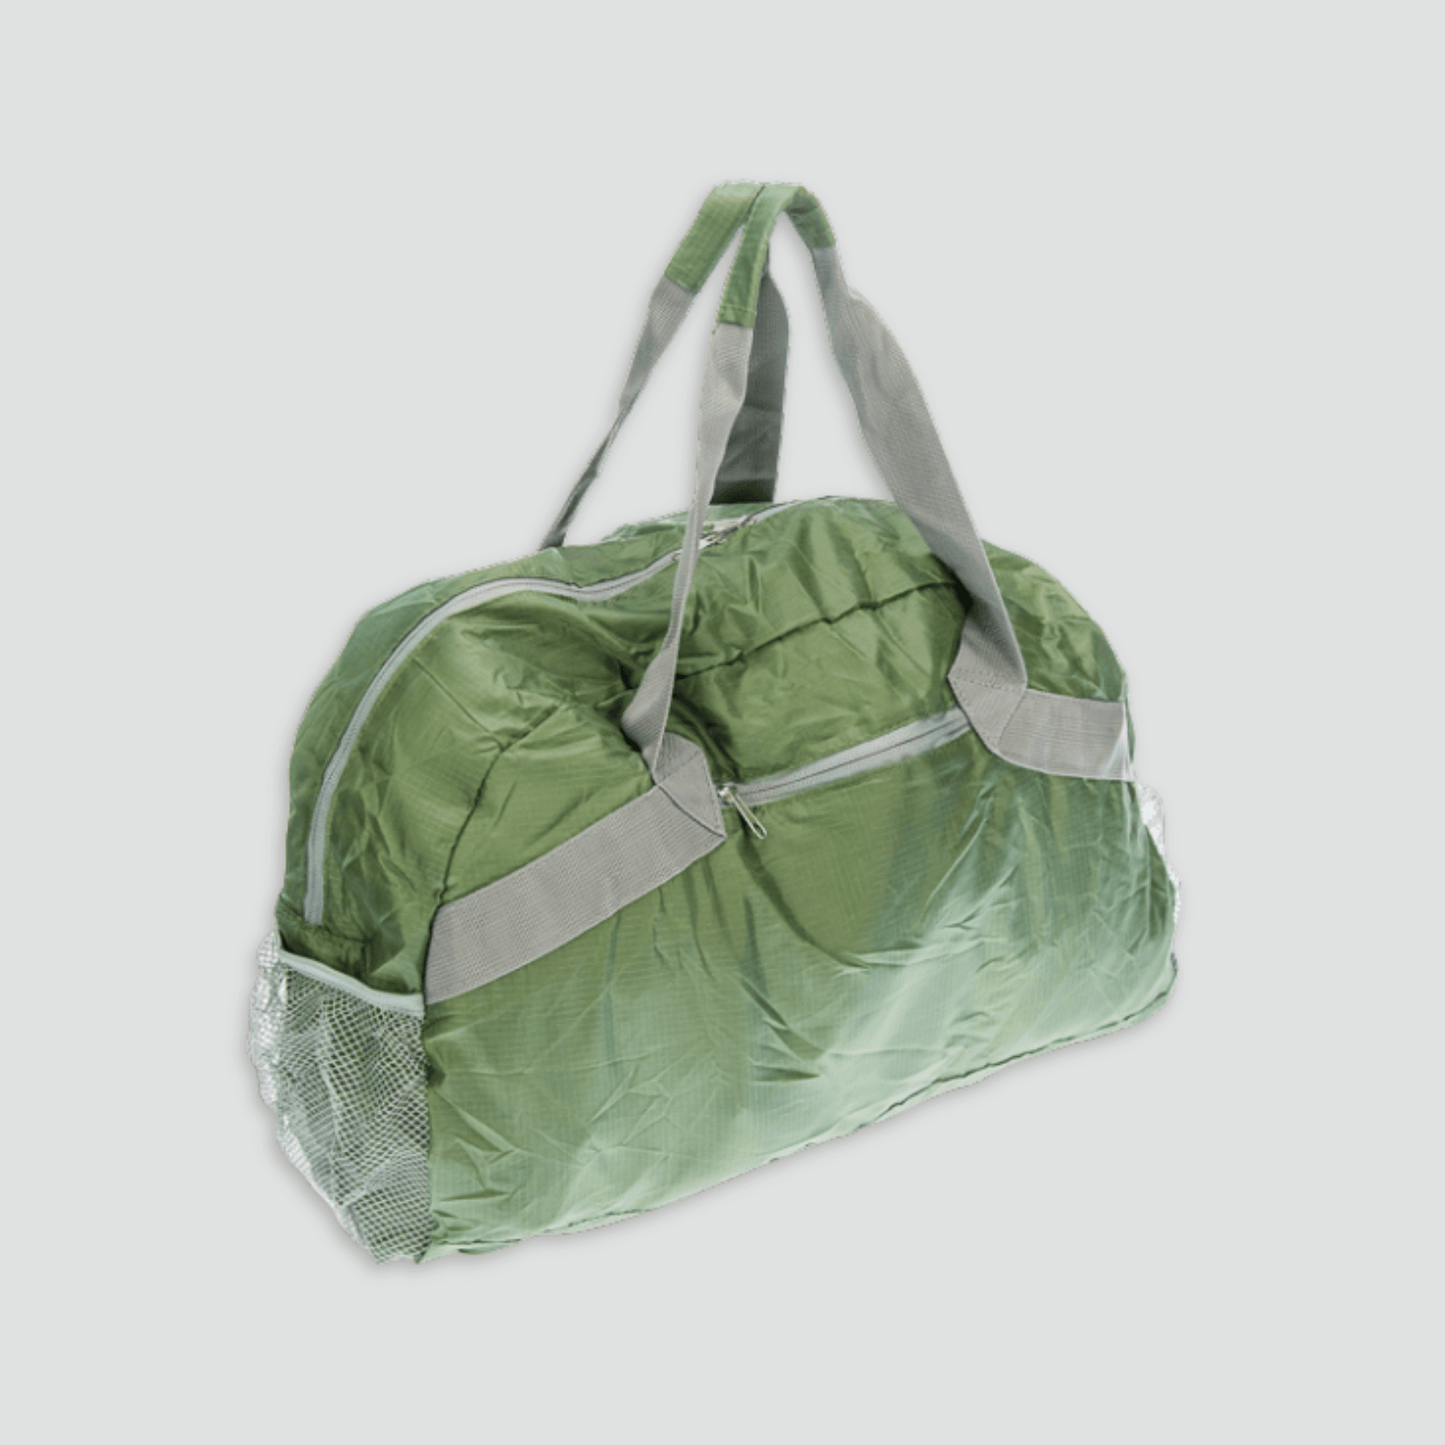 Olive Green Collapsible Duffle Bag for outdoors